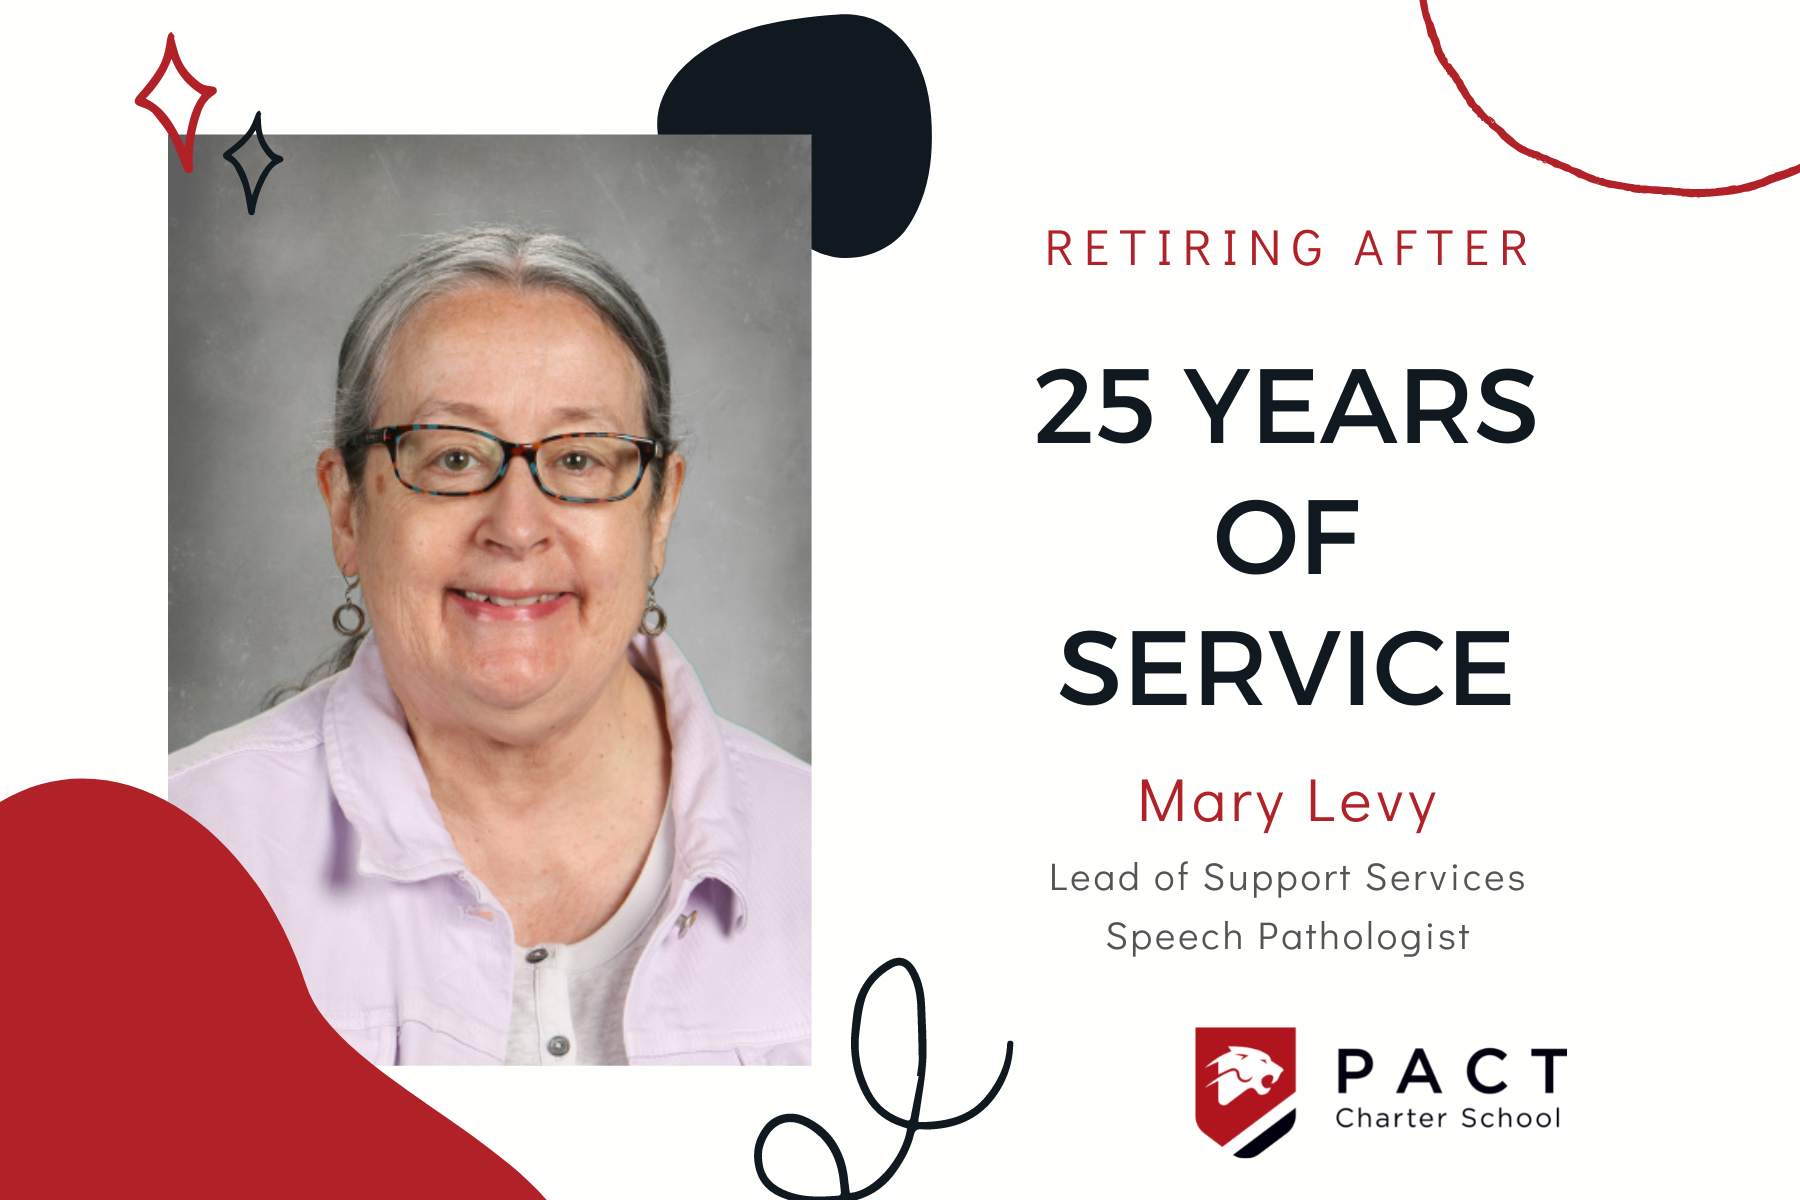 Mary Levy Retires After 25 Years